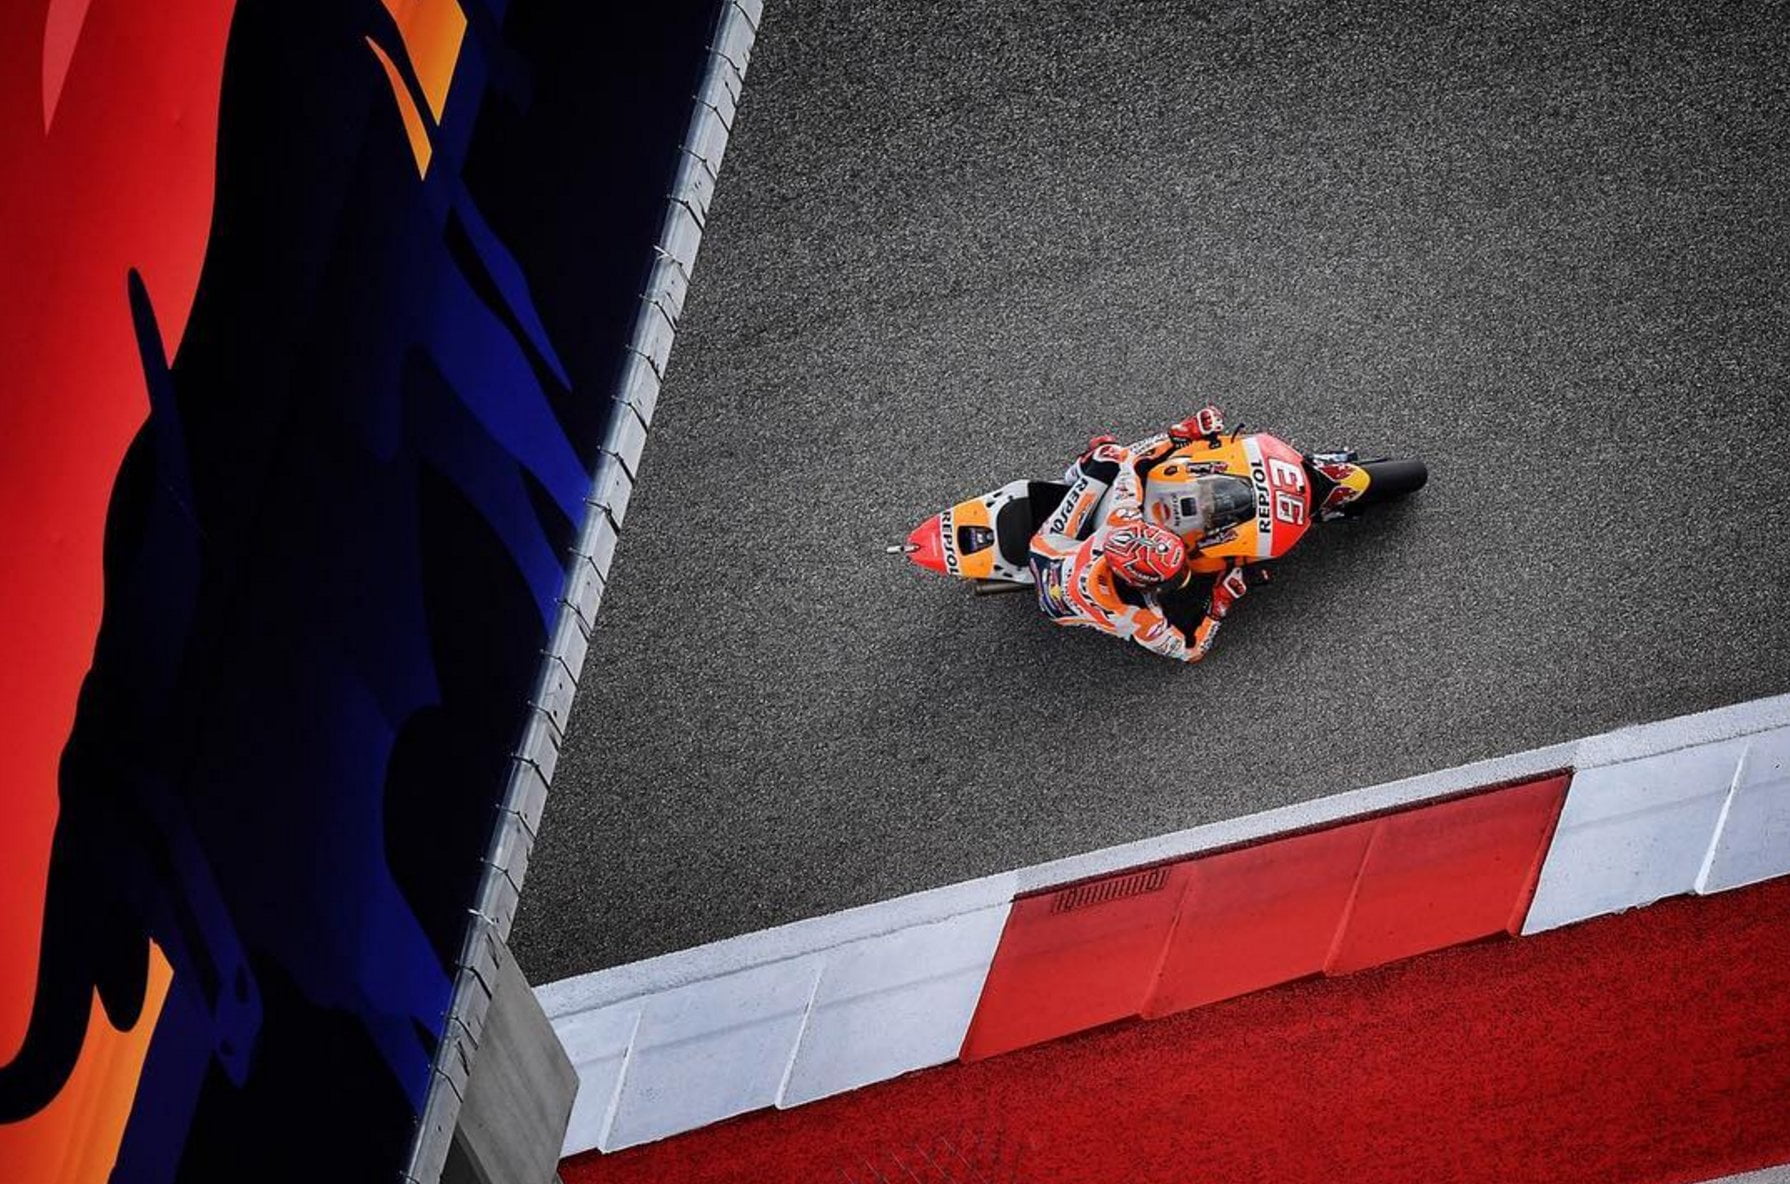 #AmericasGP MotoGP FP4: Márquez not slowed down by his morning falls!